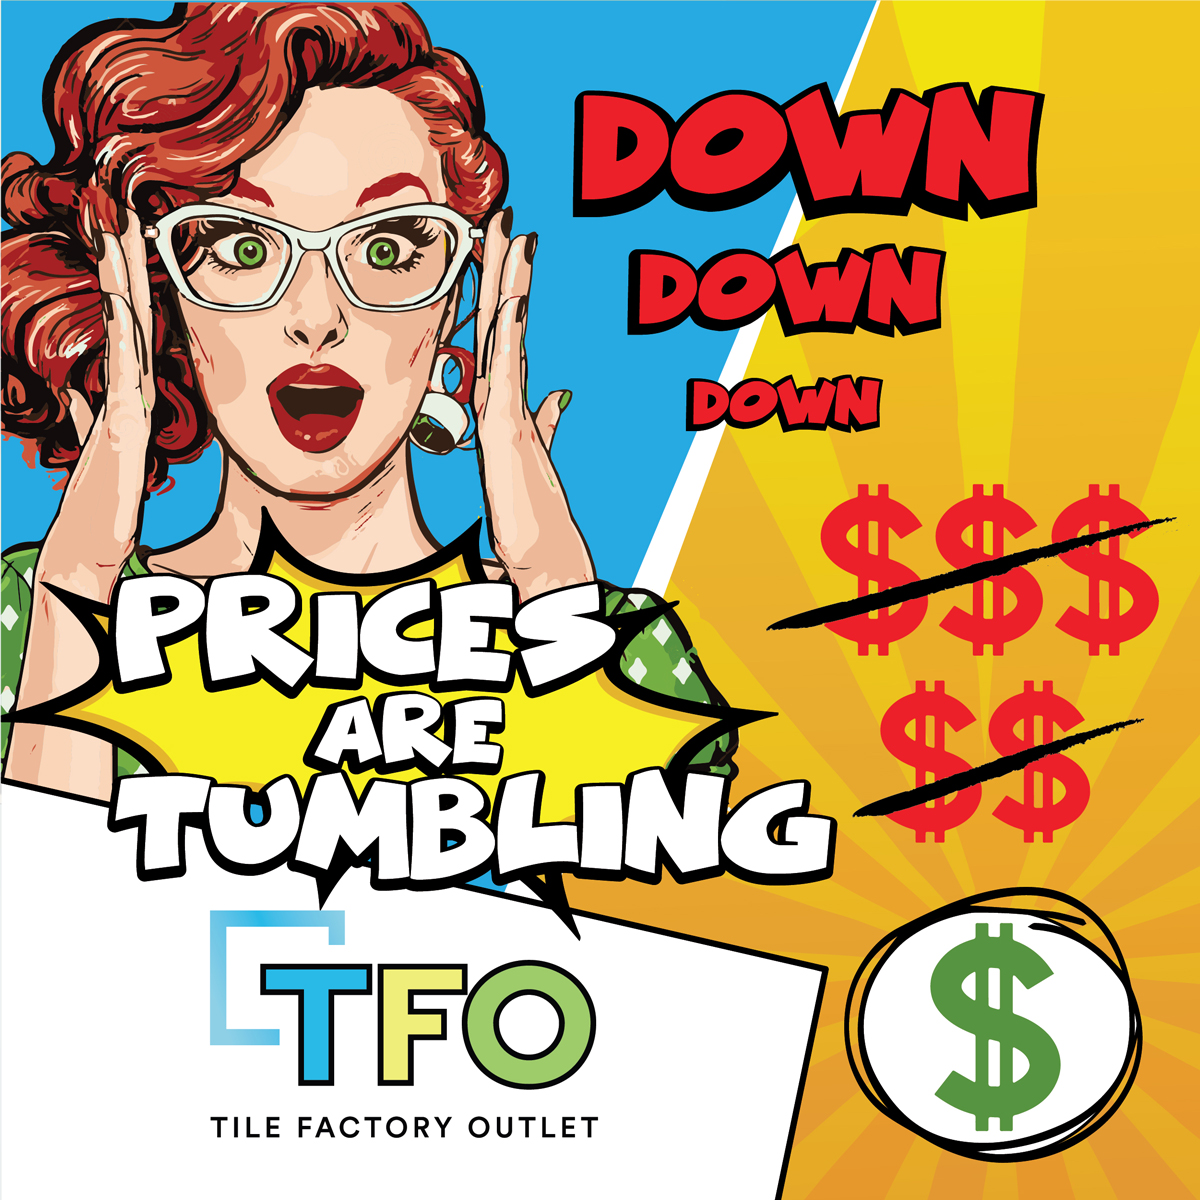 Save Thousands On Tiles At TFO! – Brisbane